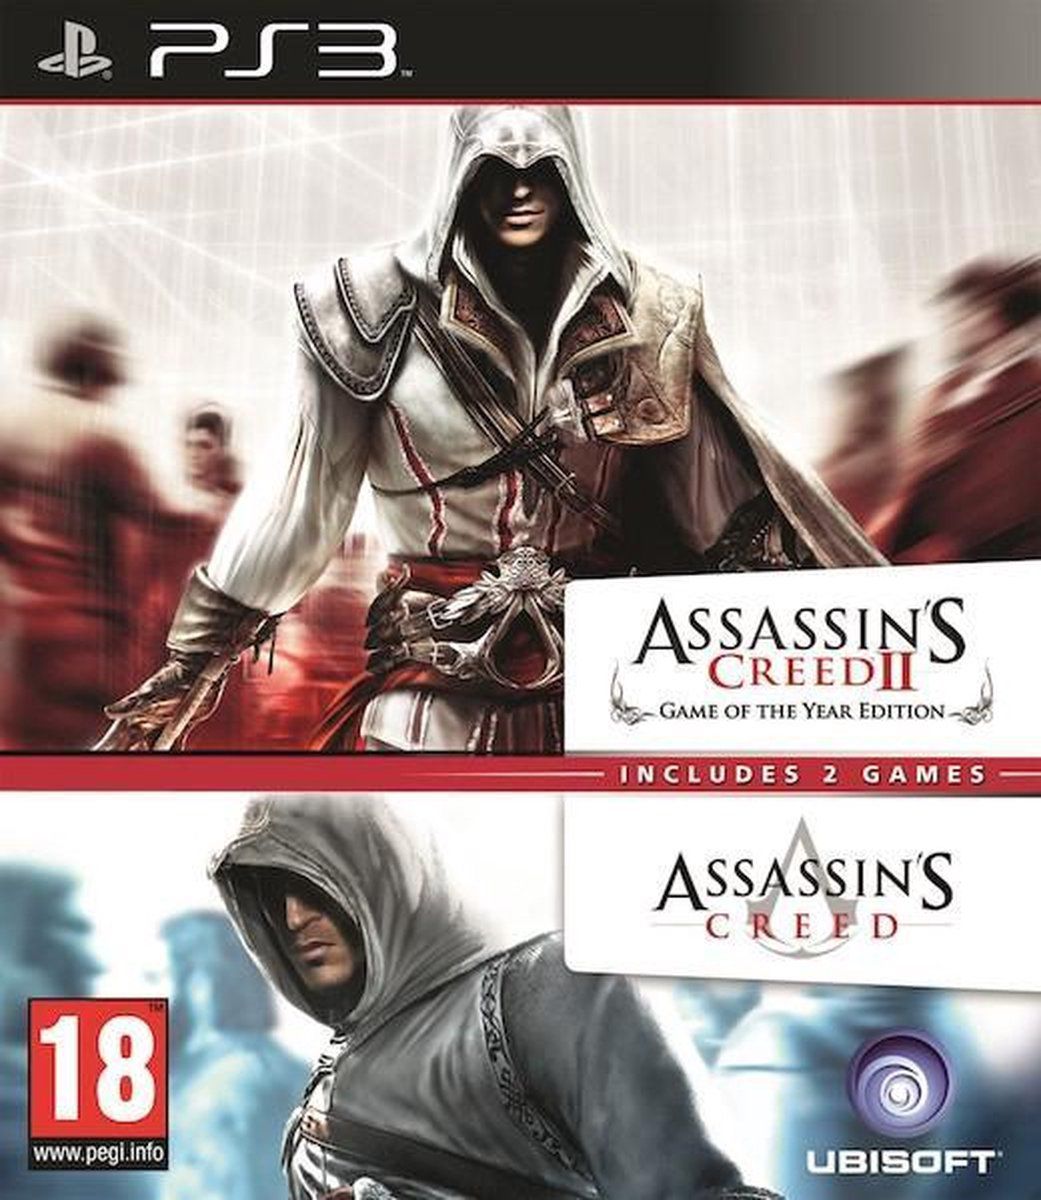 Assasssin's Creed 1 & 2 Compilation - PS3 - BLUEWAVES GAMES